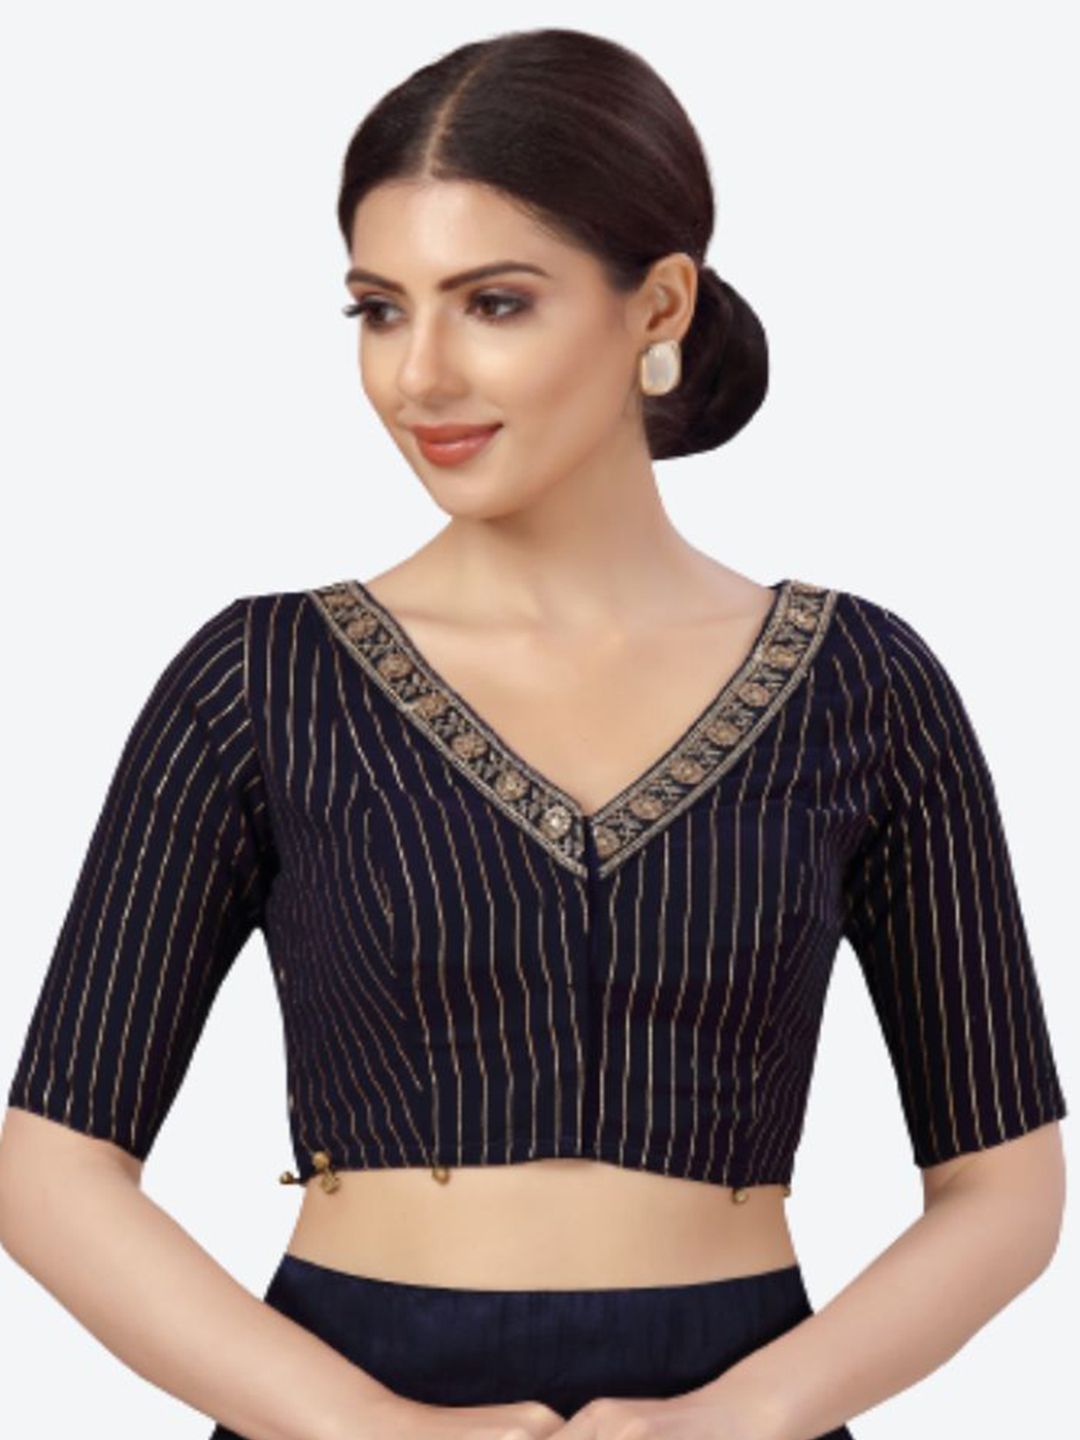 Studio Shringaar Navy Blue & Gold Embroidered Saree Blouse Price in India